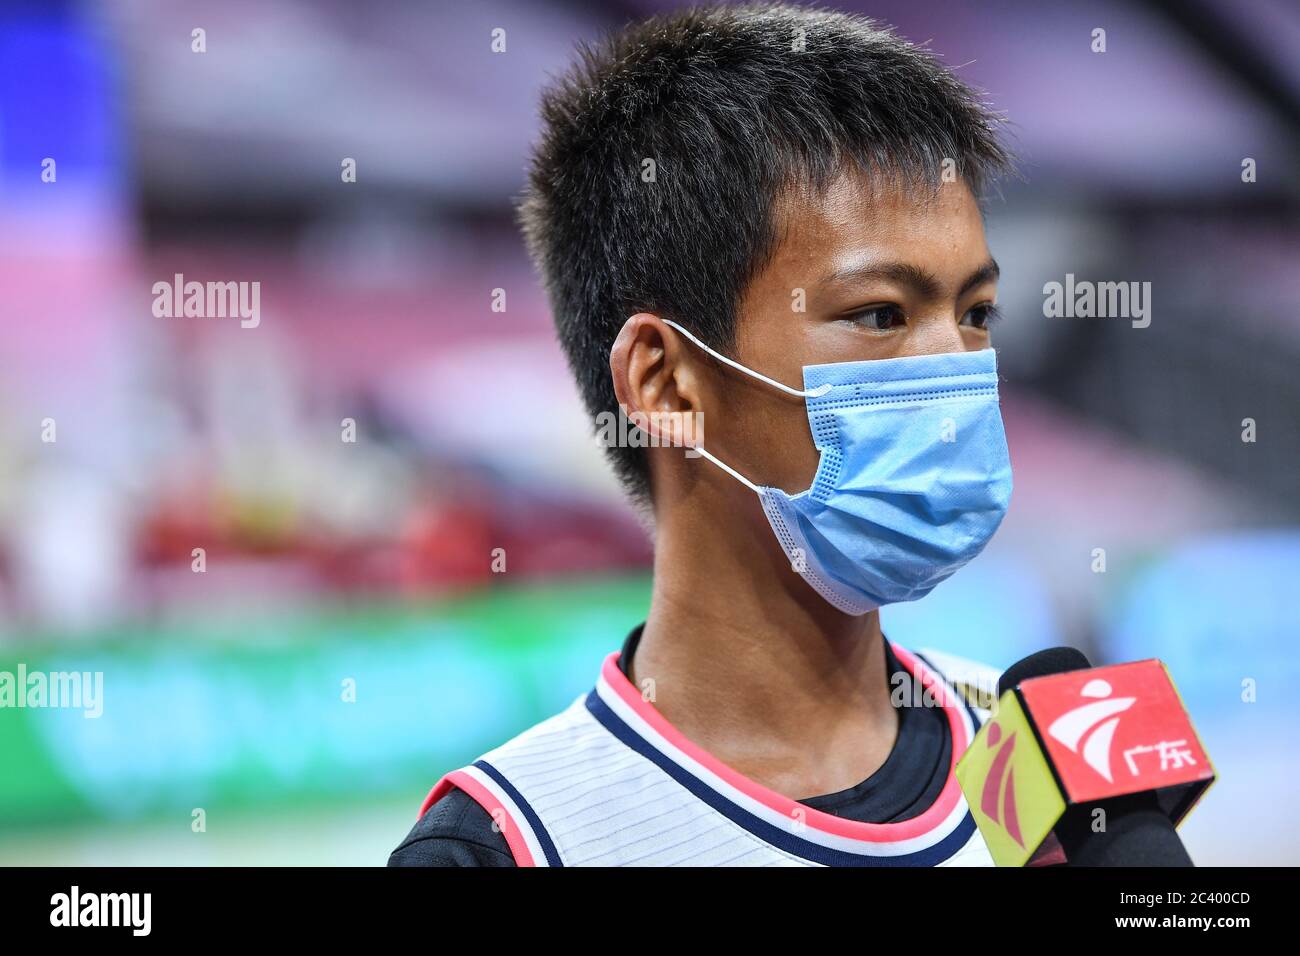 Zhang Jiacheng, an internet sensation, youth basketball player with one arm, is interviewed before a CBA game between Guangdong Southern Tigers and Shanxi Loongs, as he was invited to help the referees in a ceremonial tip off ceremony at the beginning of the game, Dongguan city, south China's Guangdong province, 20 June 2020. Stock Photo